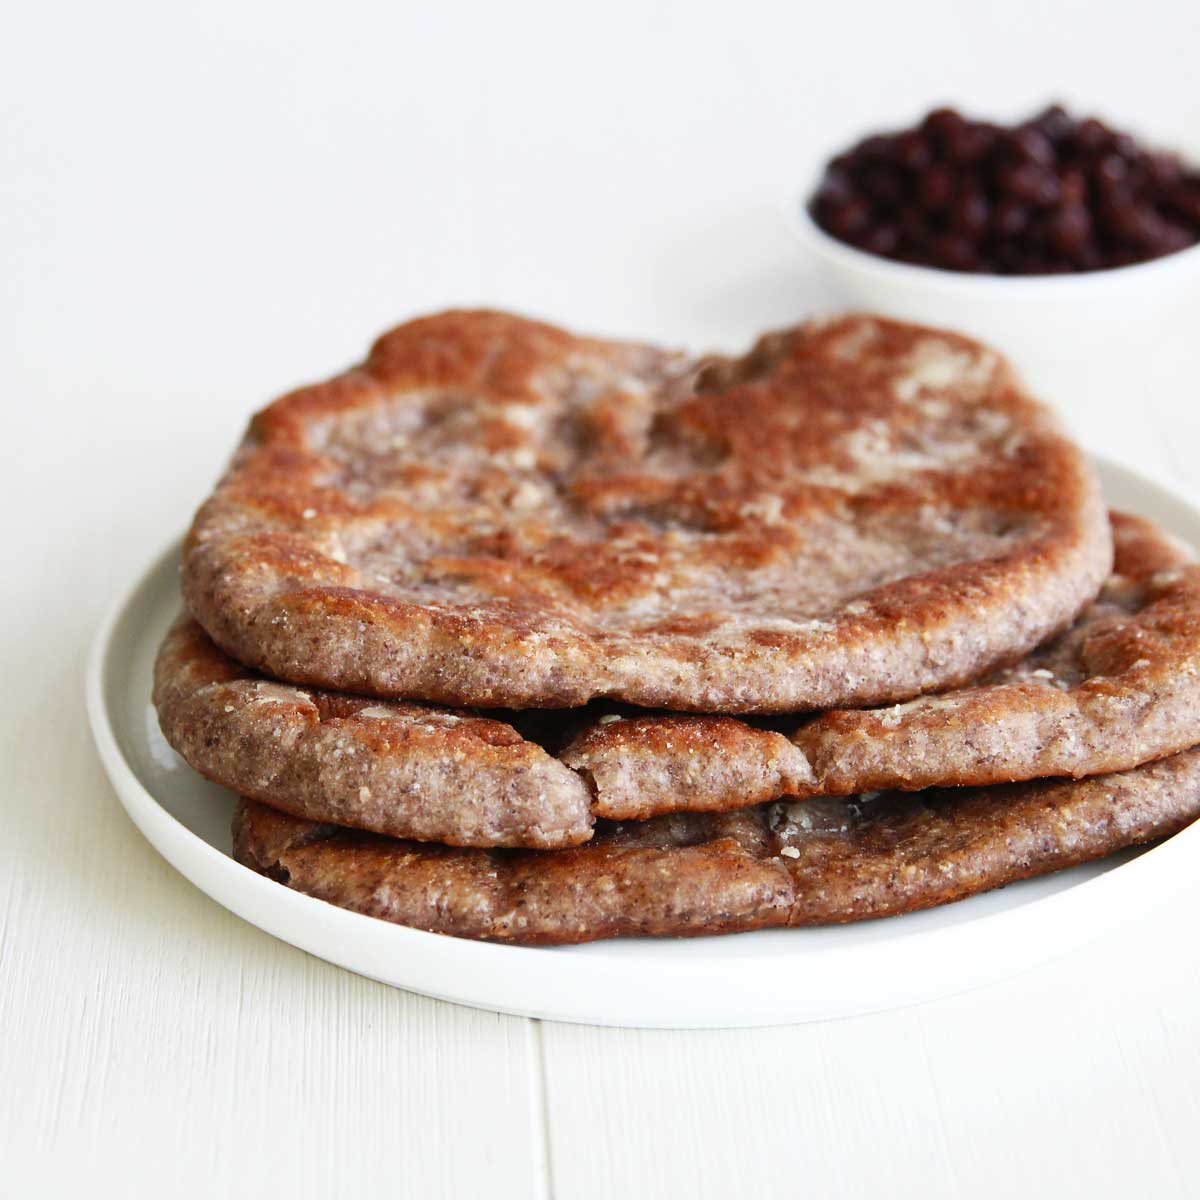 Black Bean Naan (Lower Carb Flatbread Made with Canned Black Beans) - sweet potato mooncakes